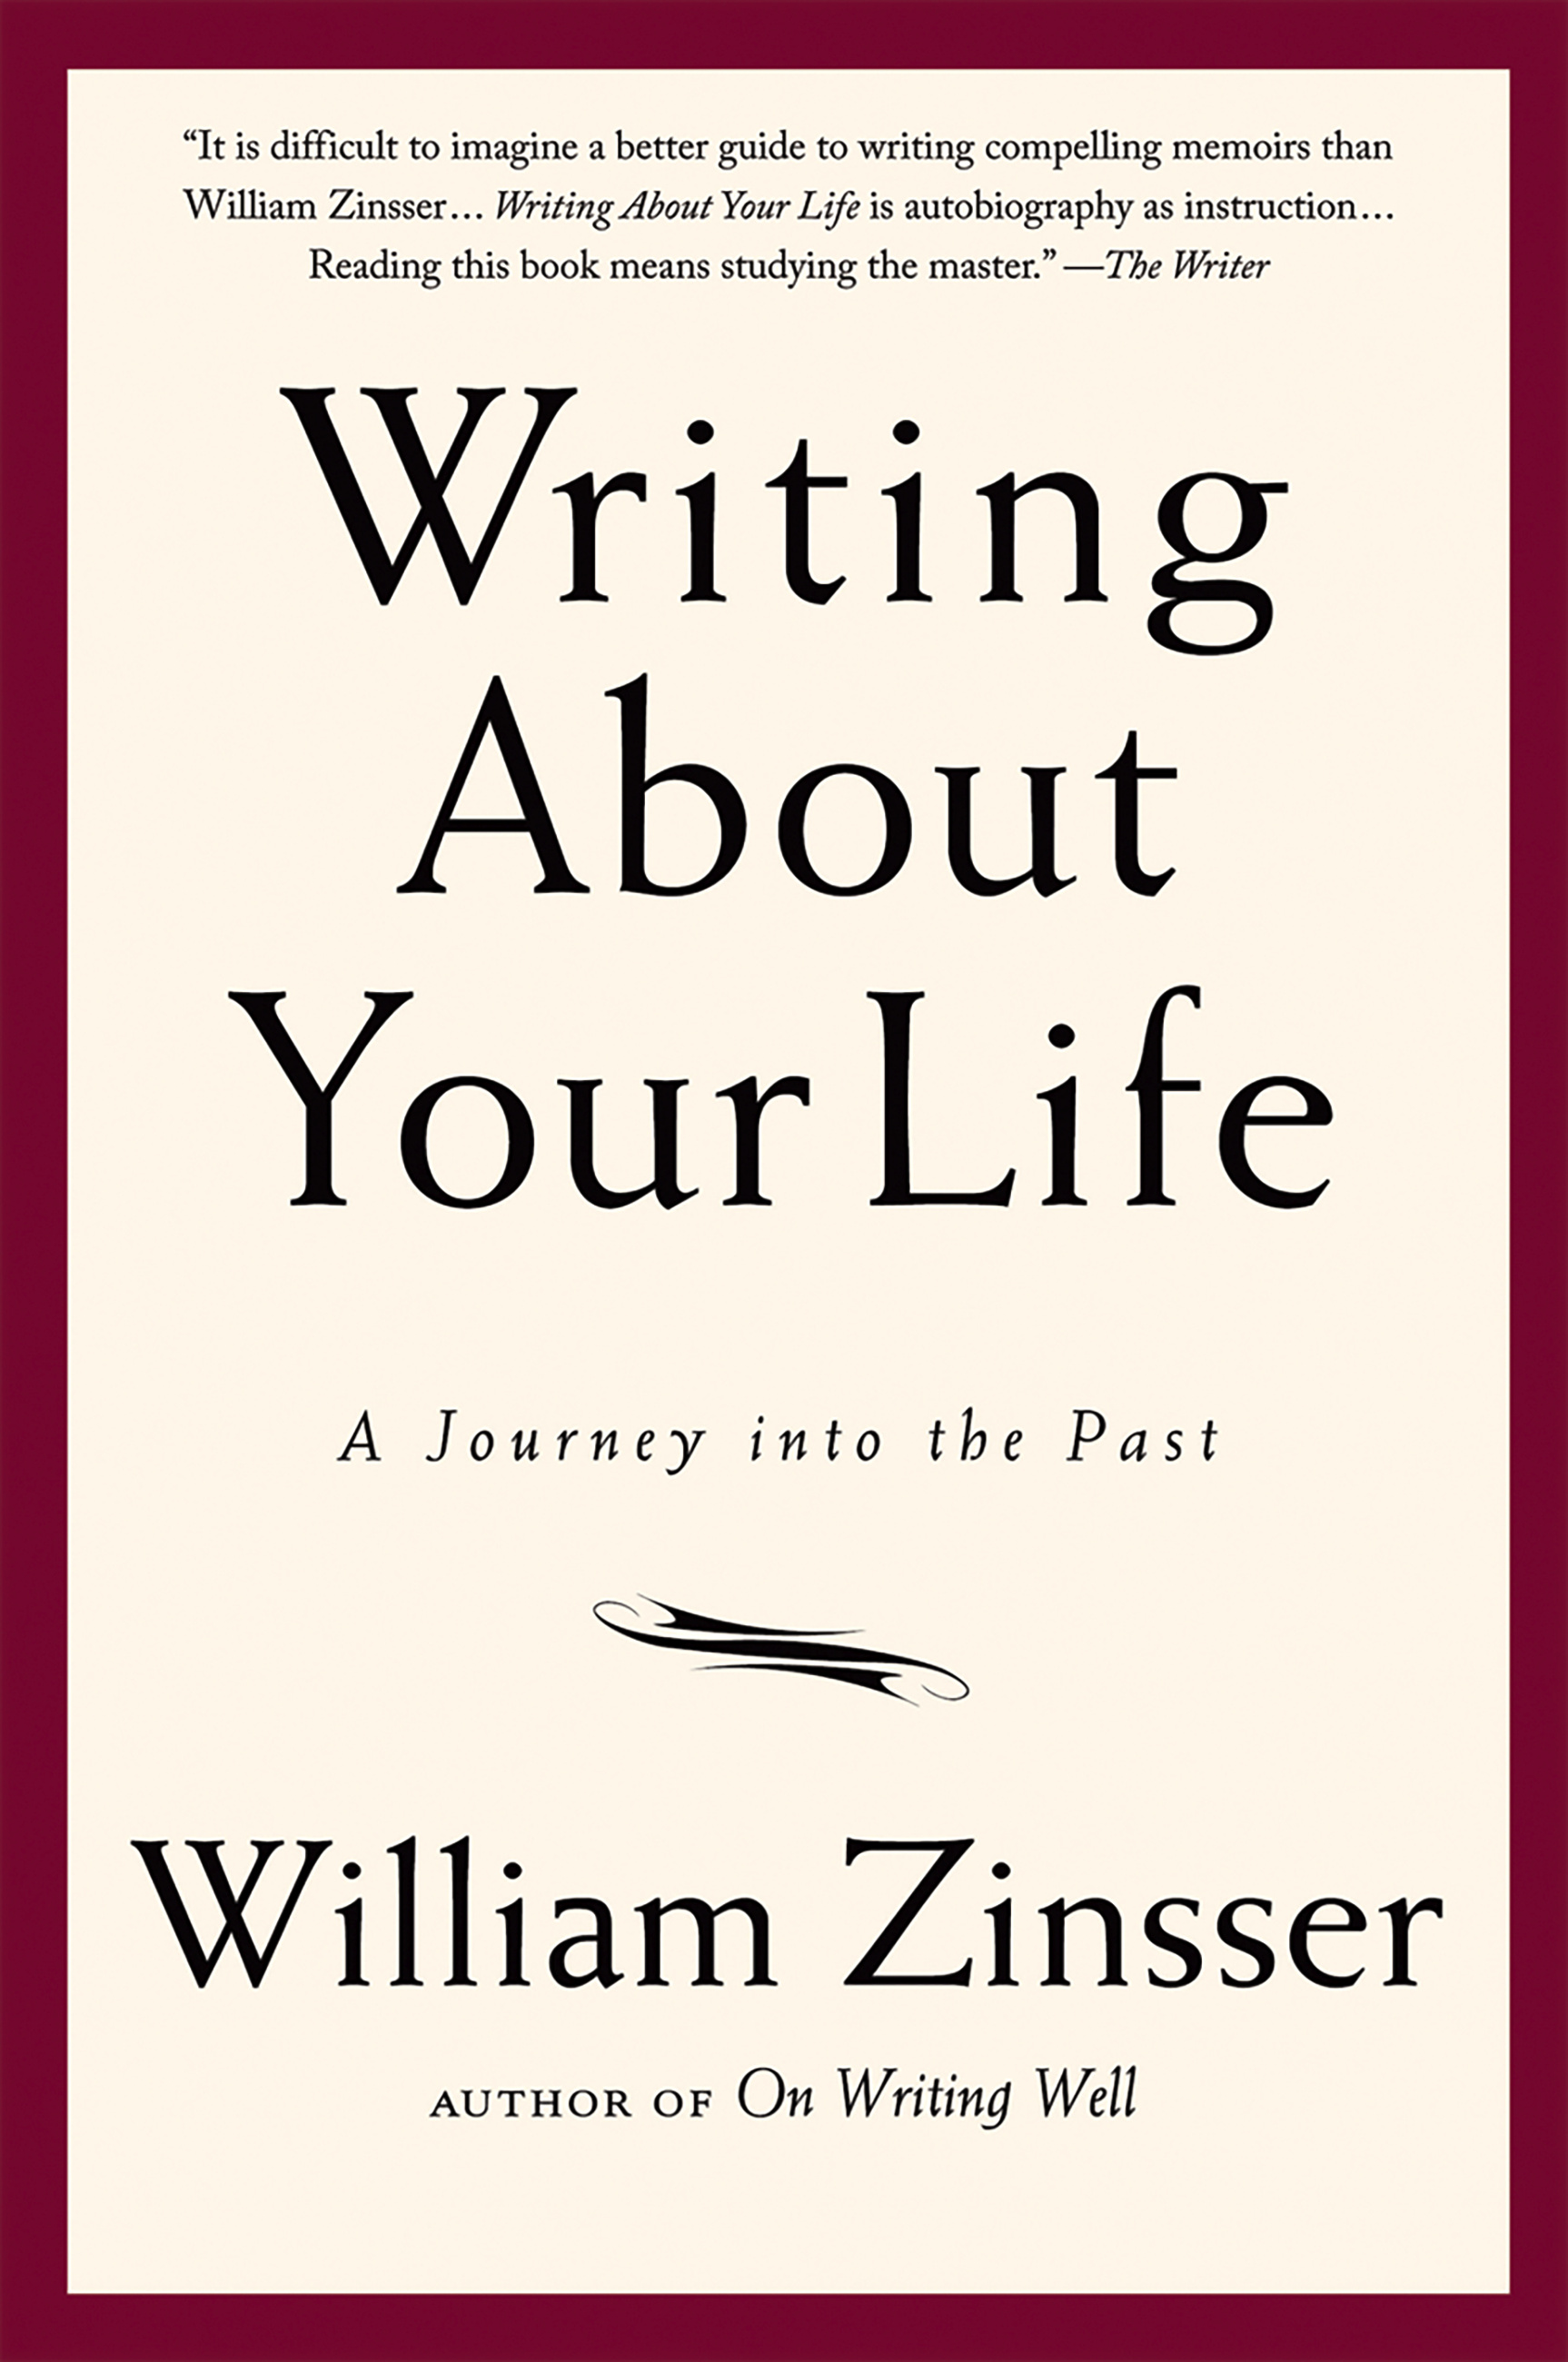 Writing About Your Life by William Zinsser  Da Capo Press